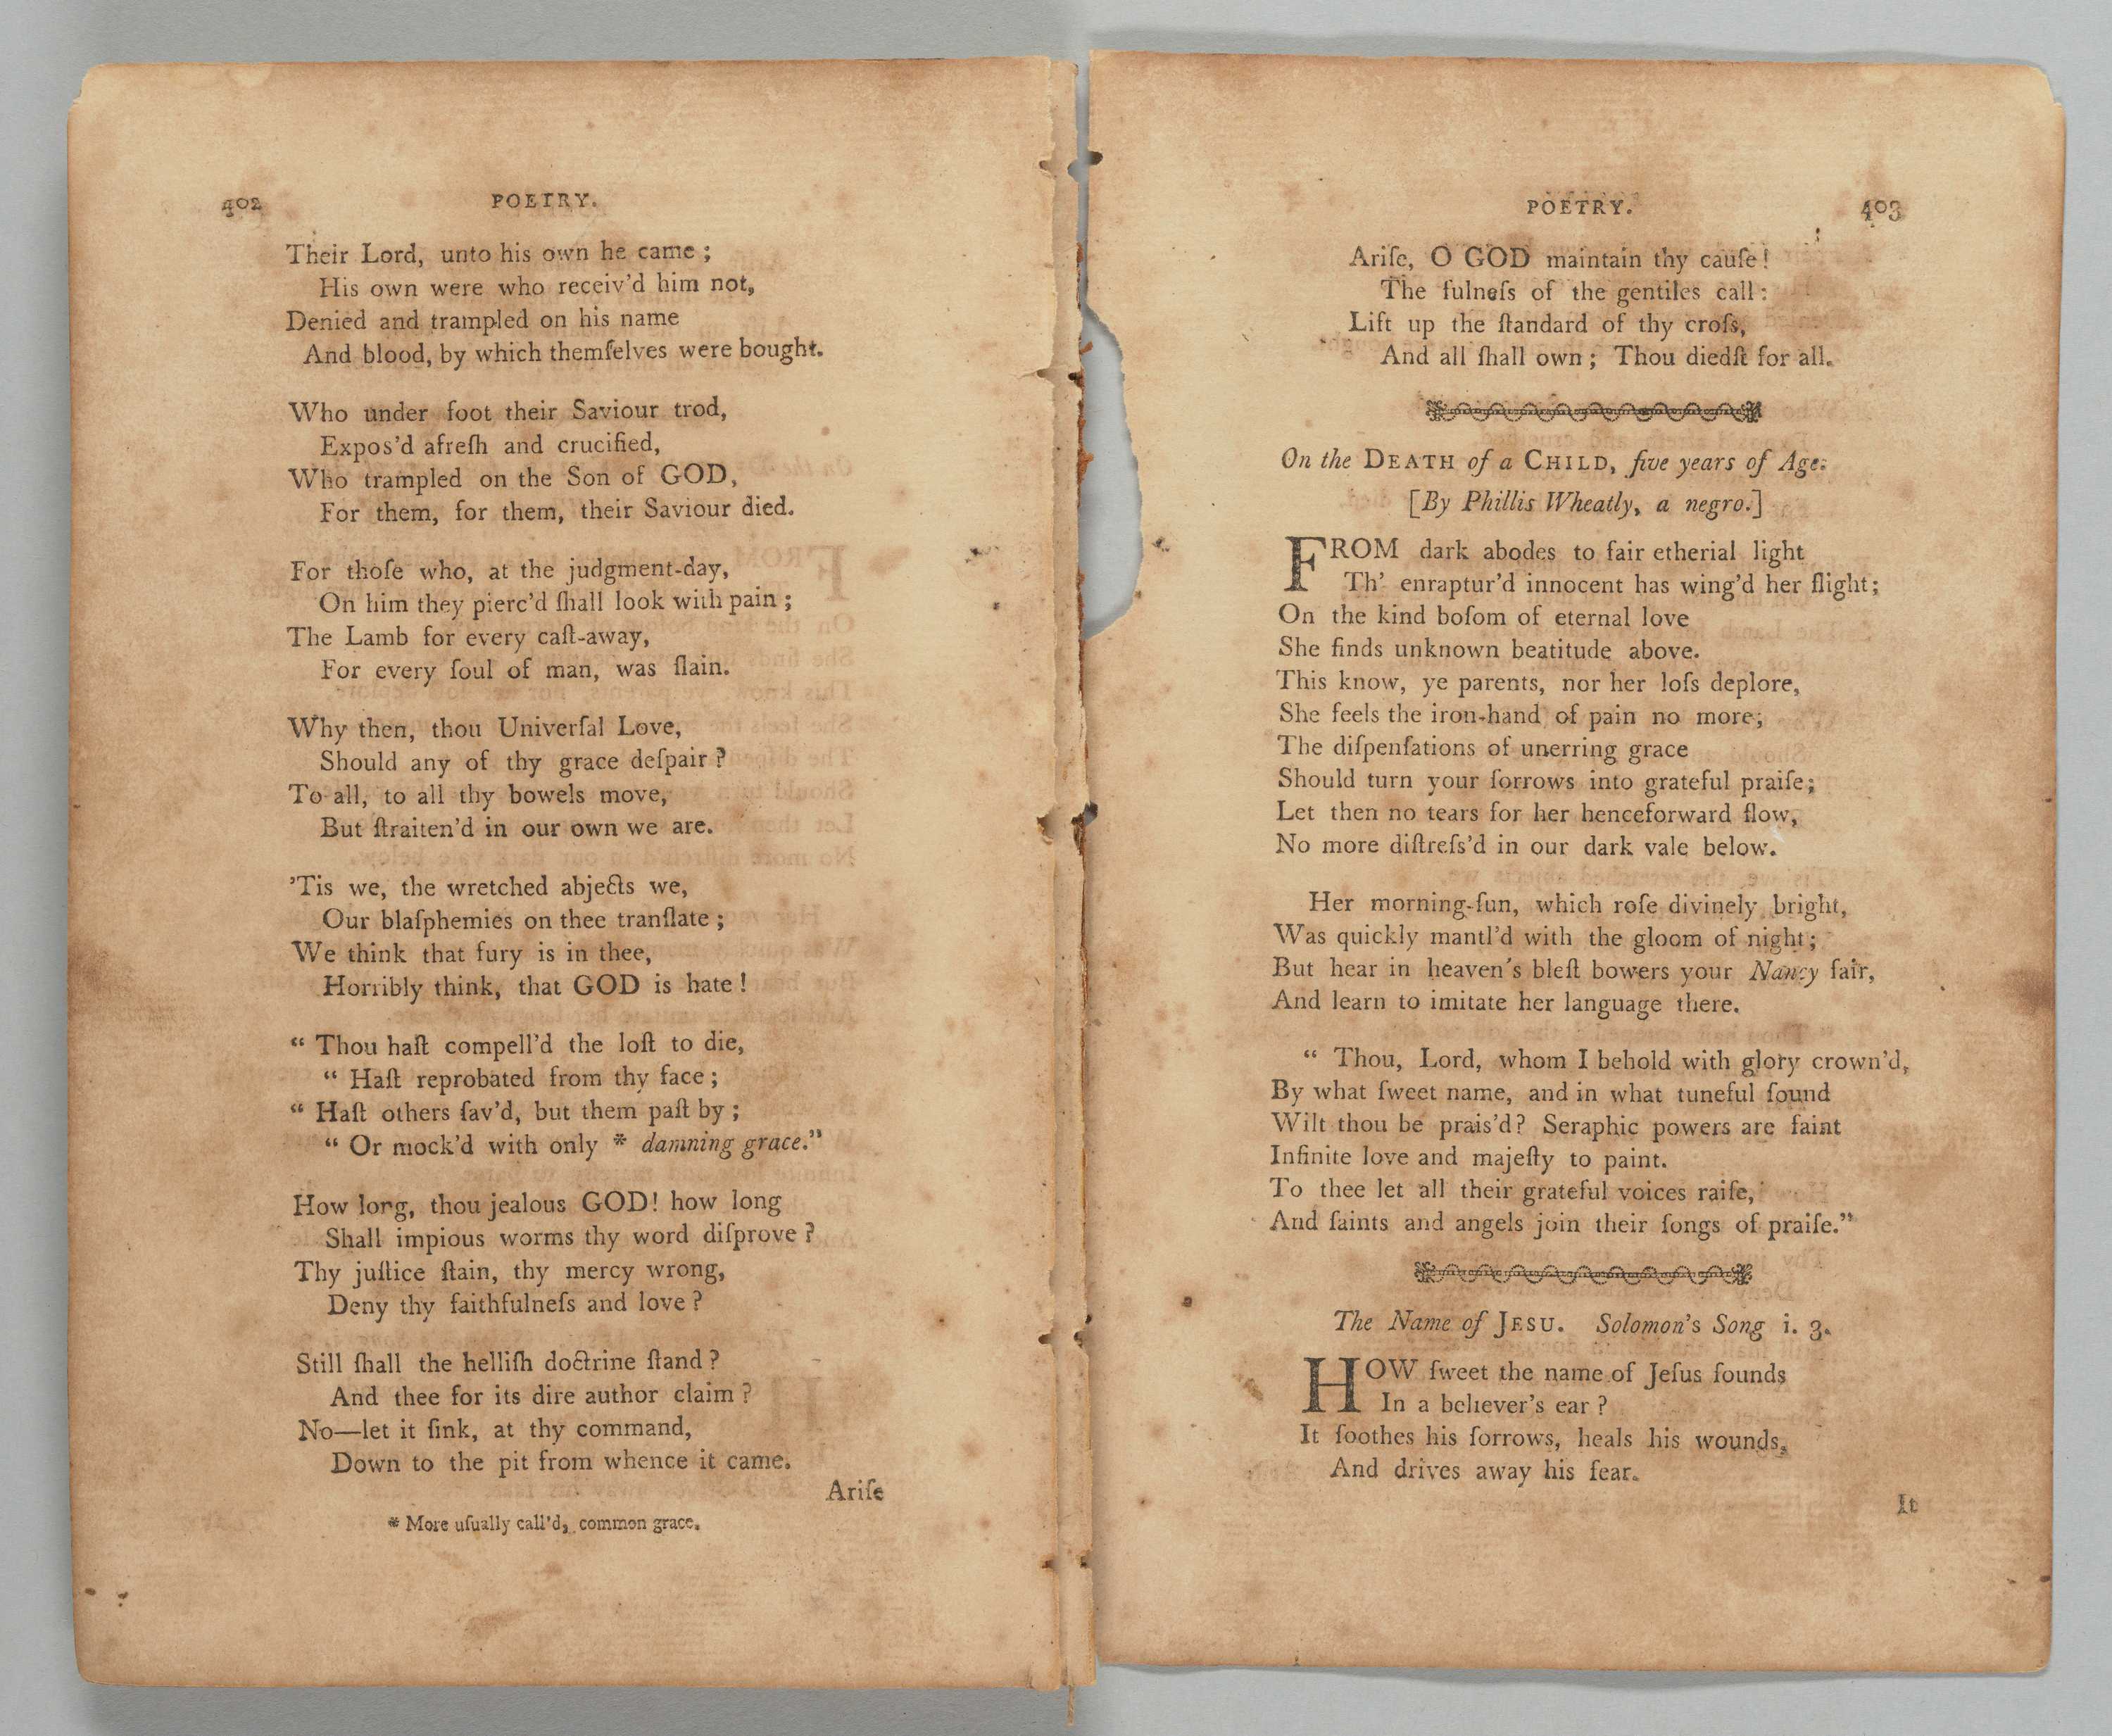 Two pages from Phillis Wheatley's book of poetry, including the poem "On Death of a Child".